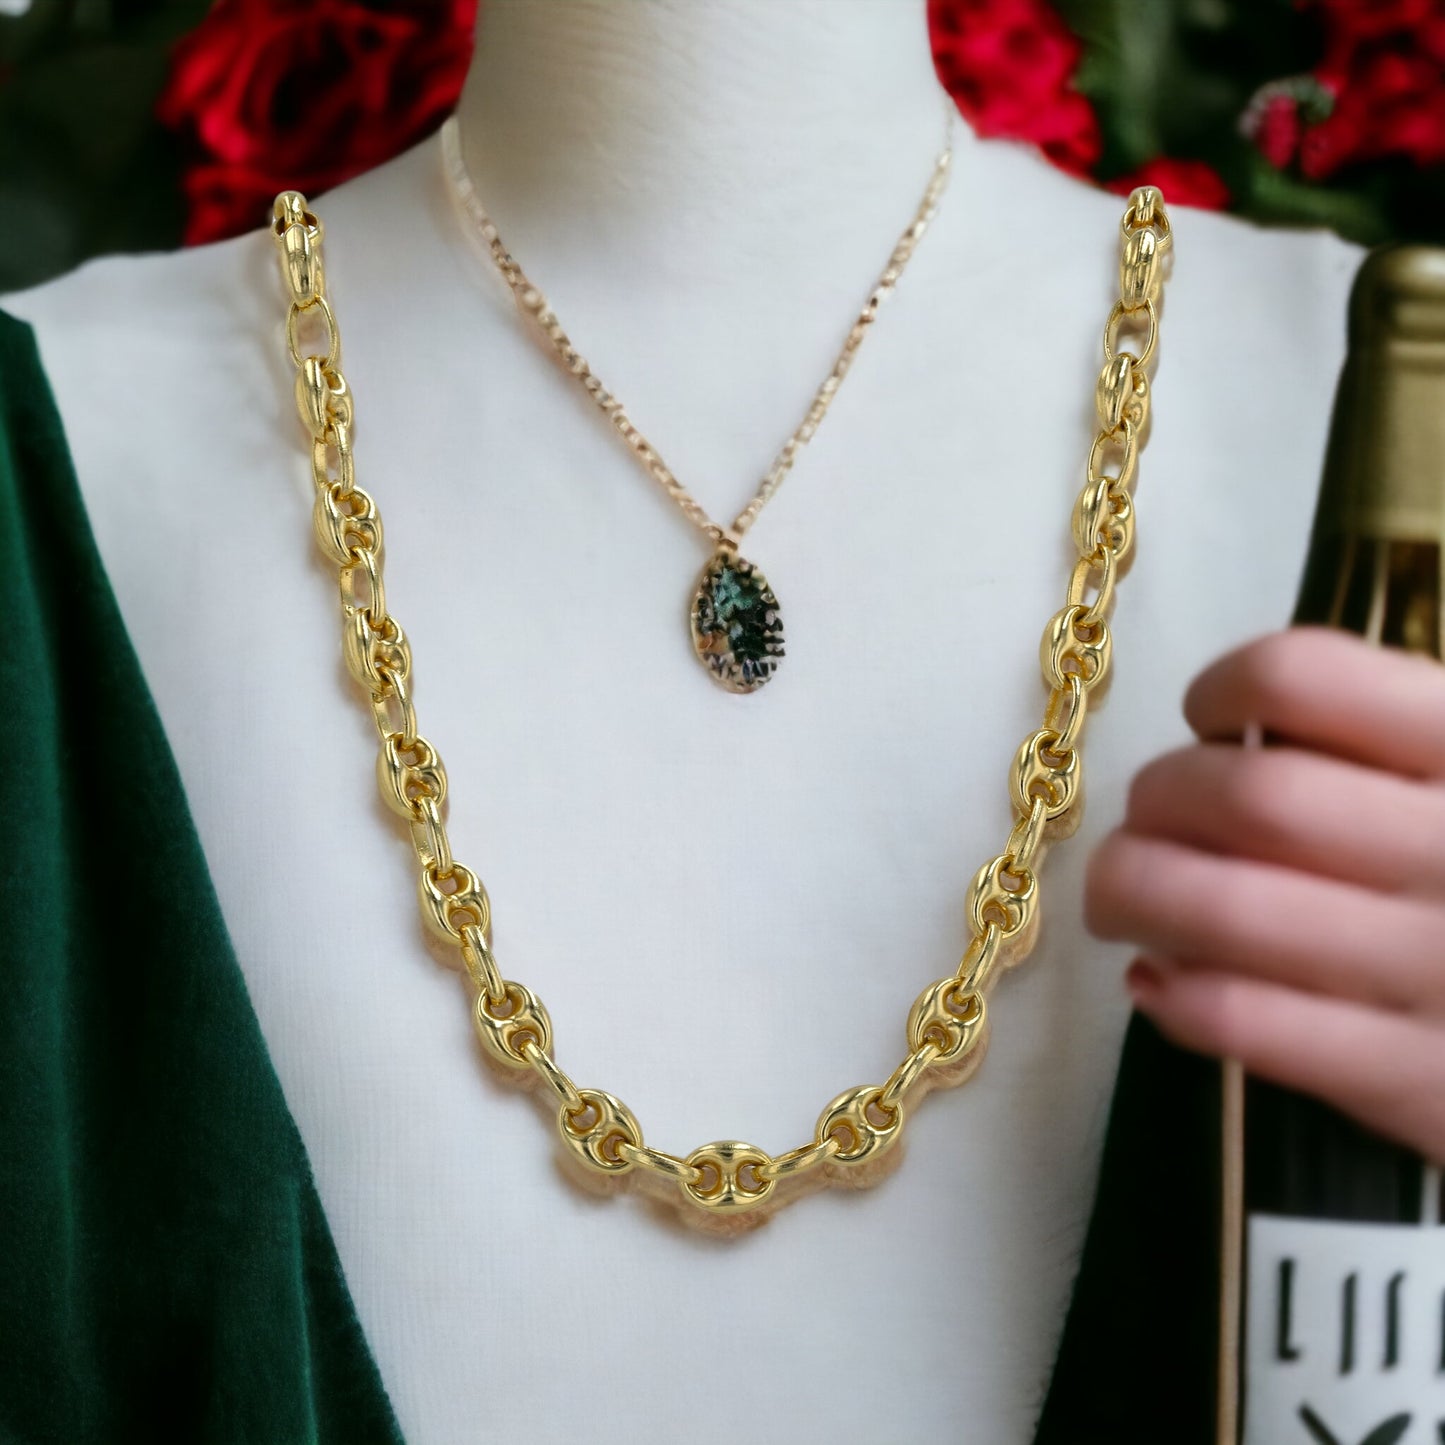 Gold 14k Mariner poof chain